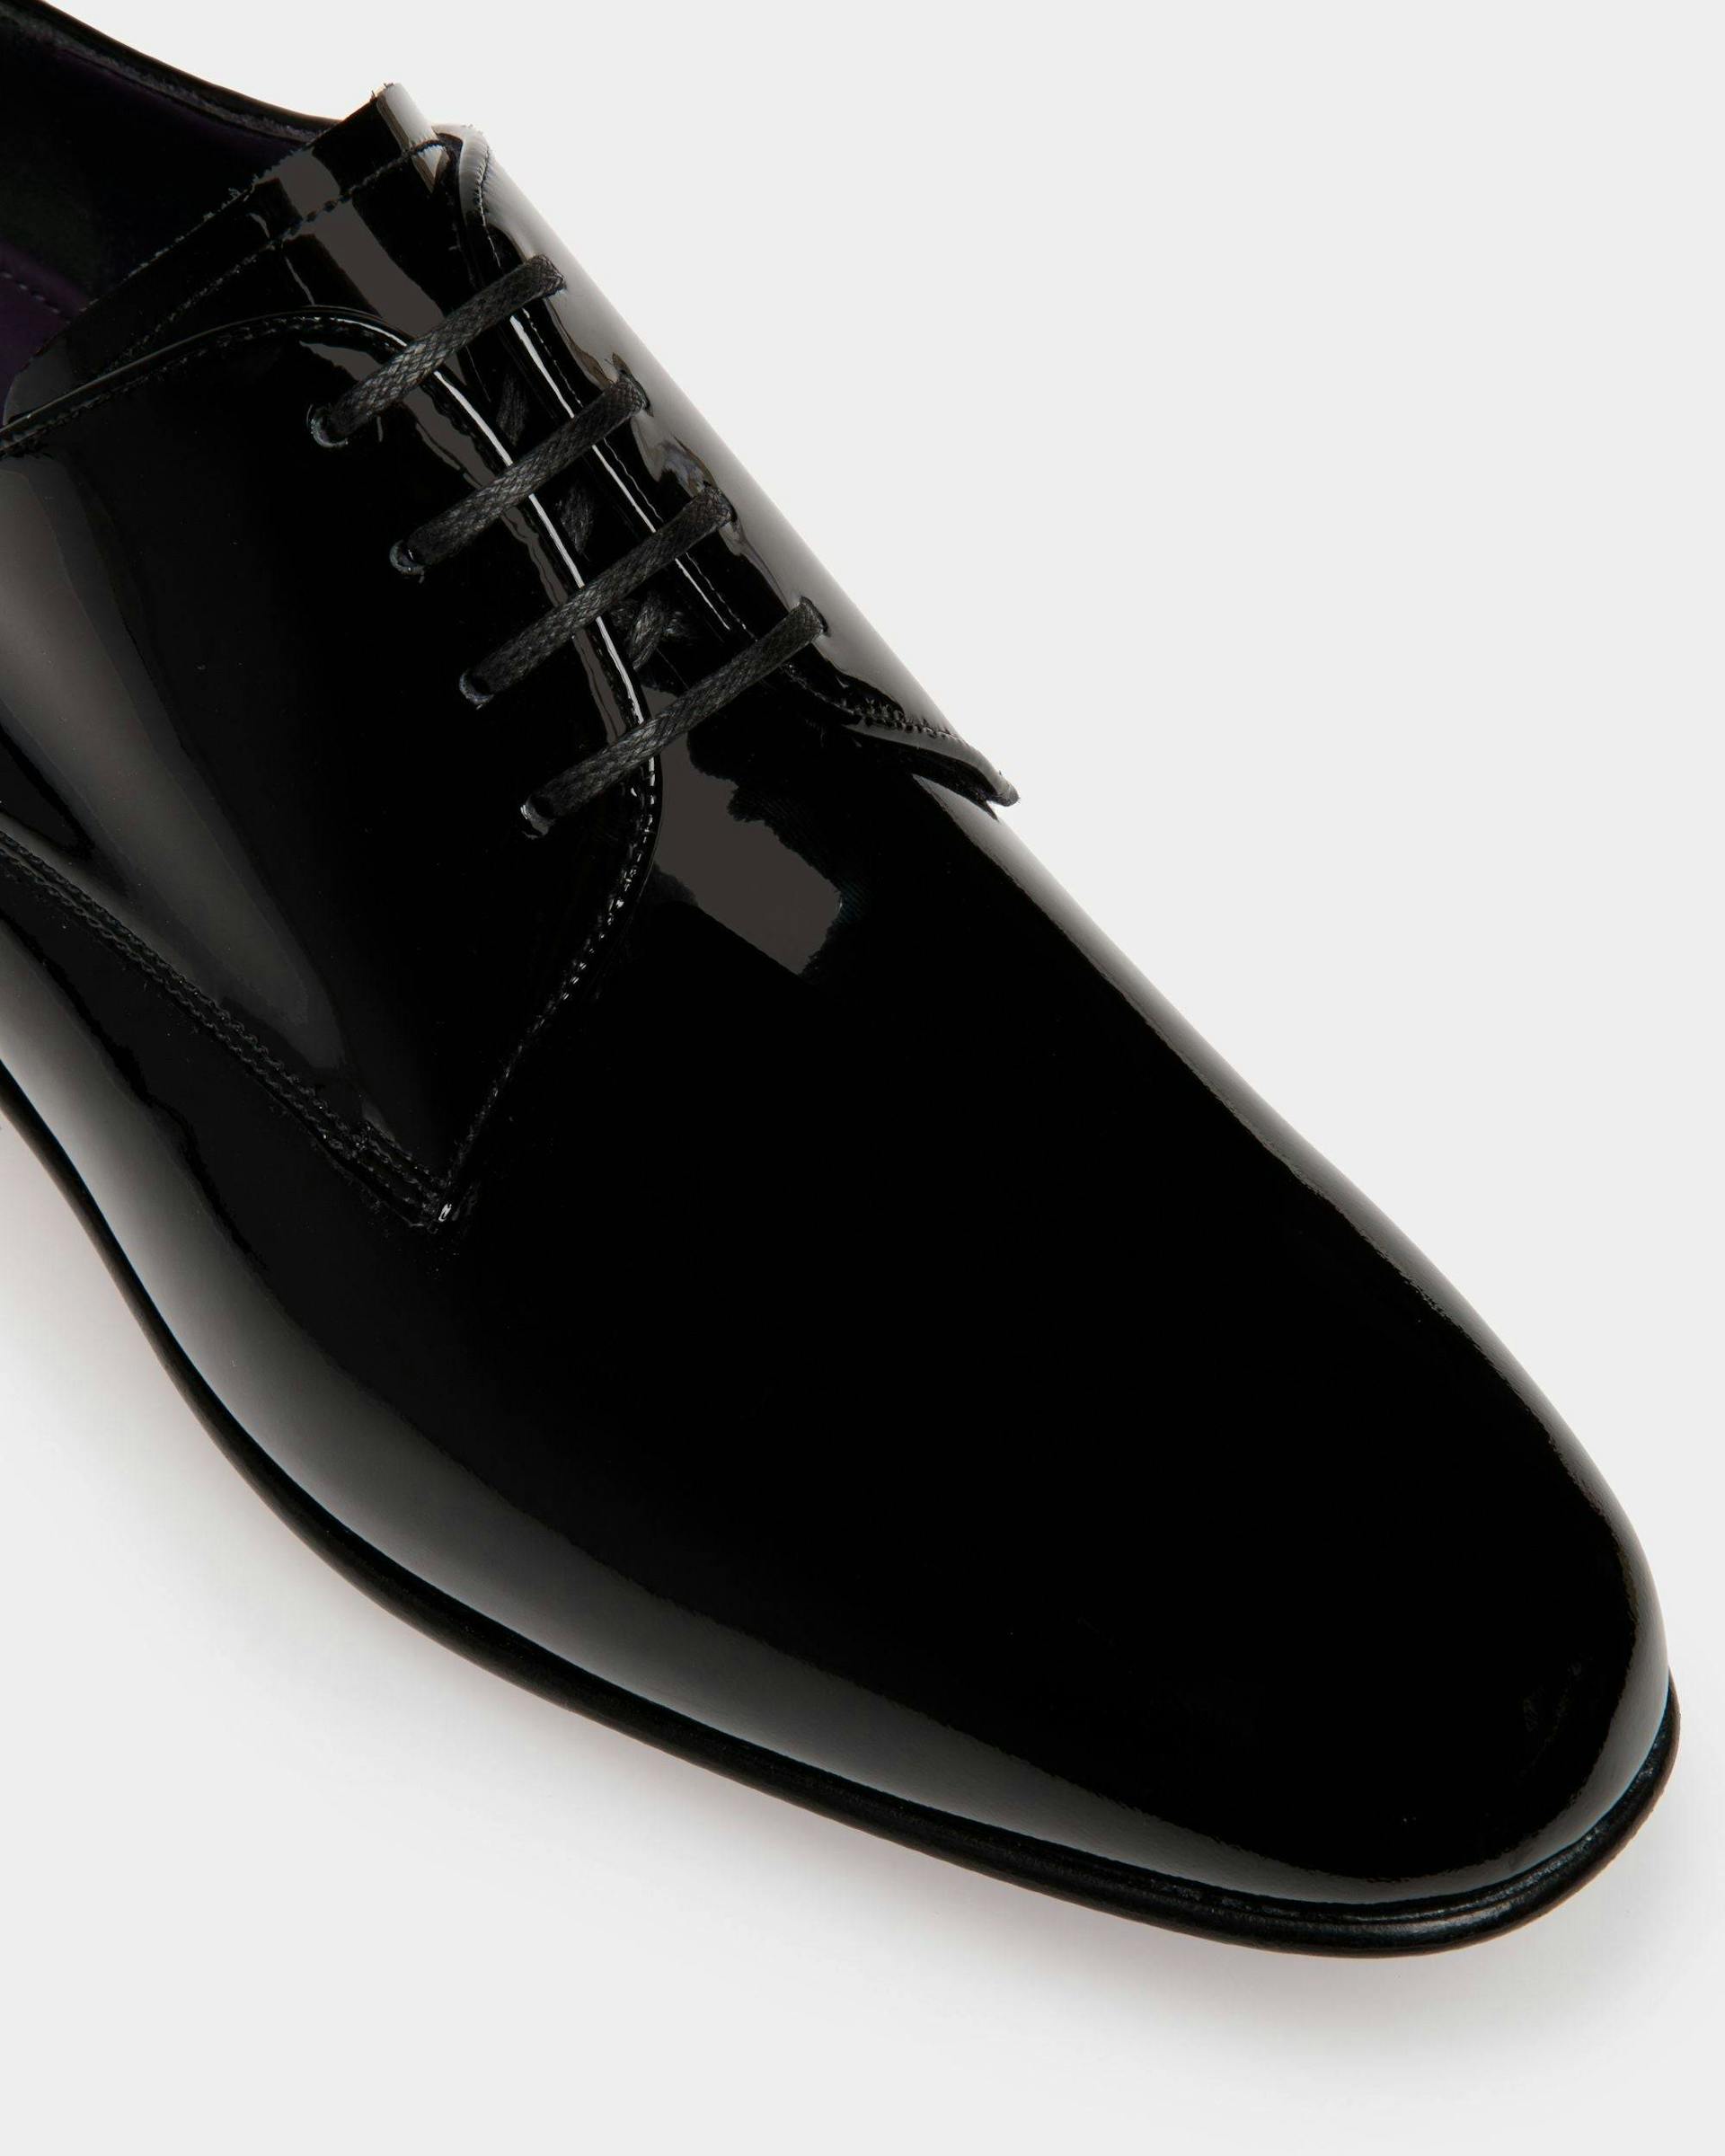 Men's Suisse Derby in Black Patent Leather | Bally | Still Life Detail